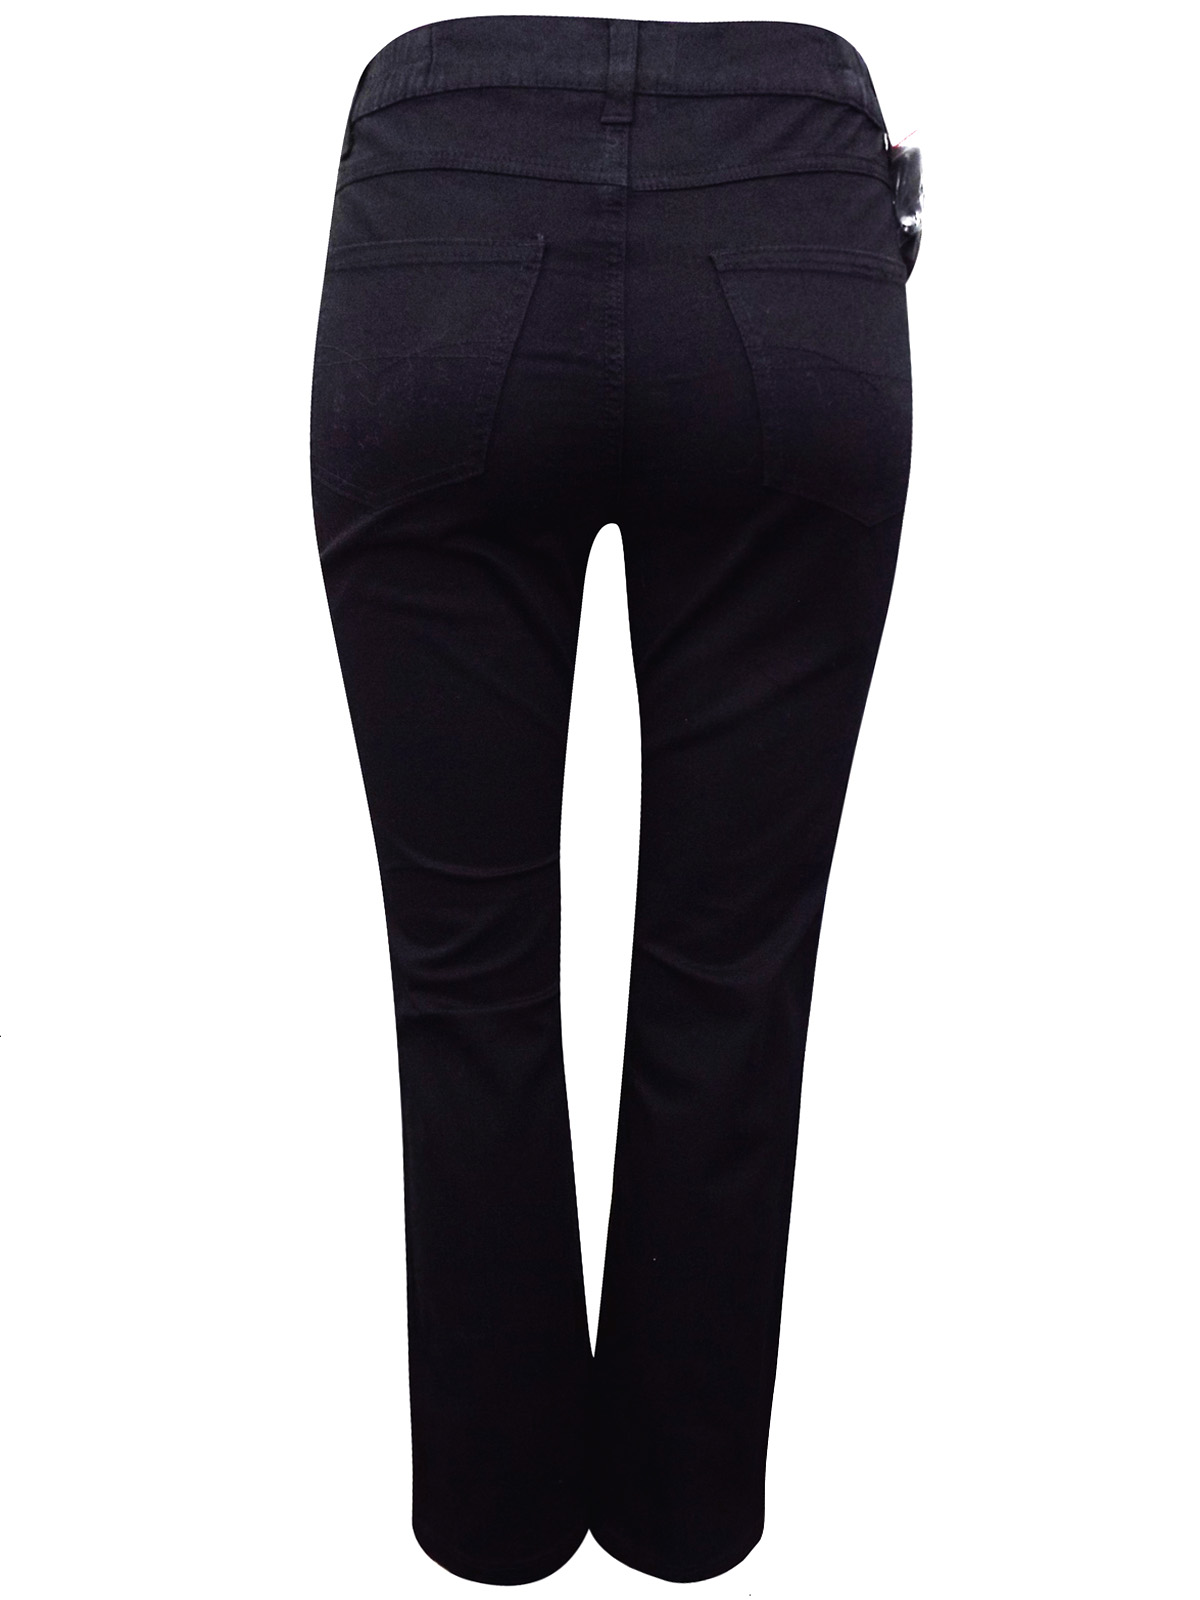 Gill - - Gill Jeans BLACK Cotton Rich 5-Pocket Straight Fit Denim Jeans ...